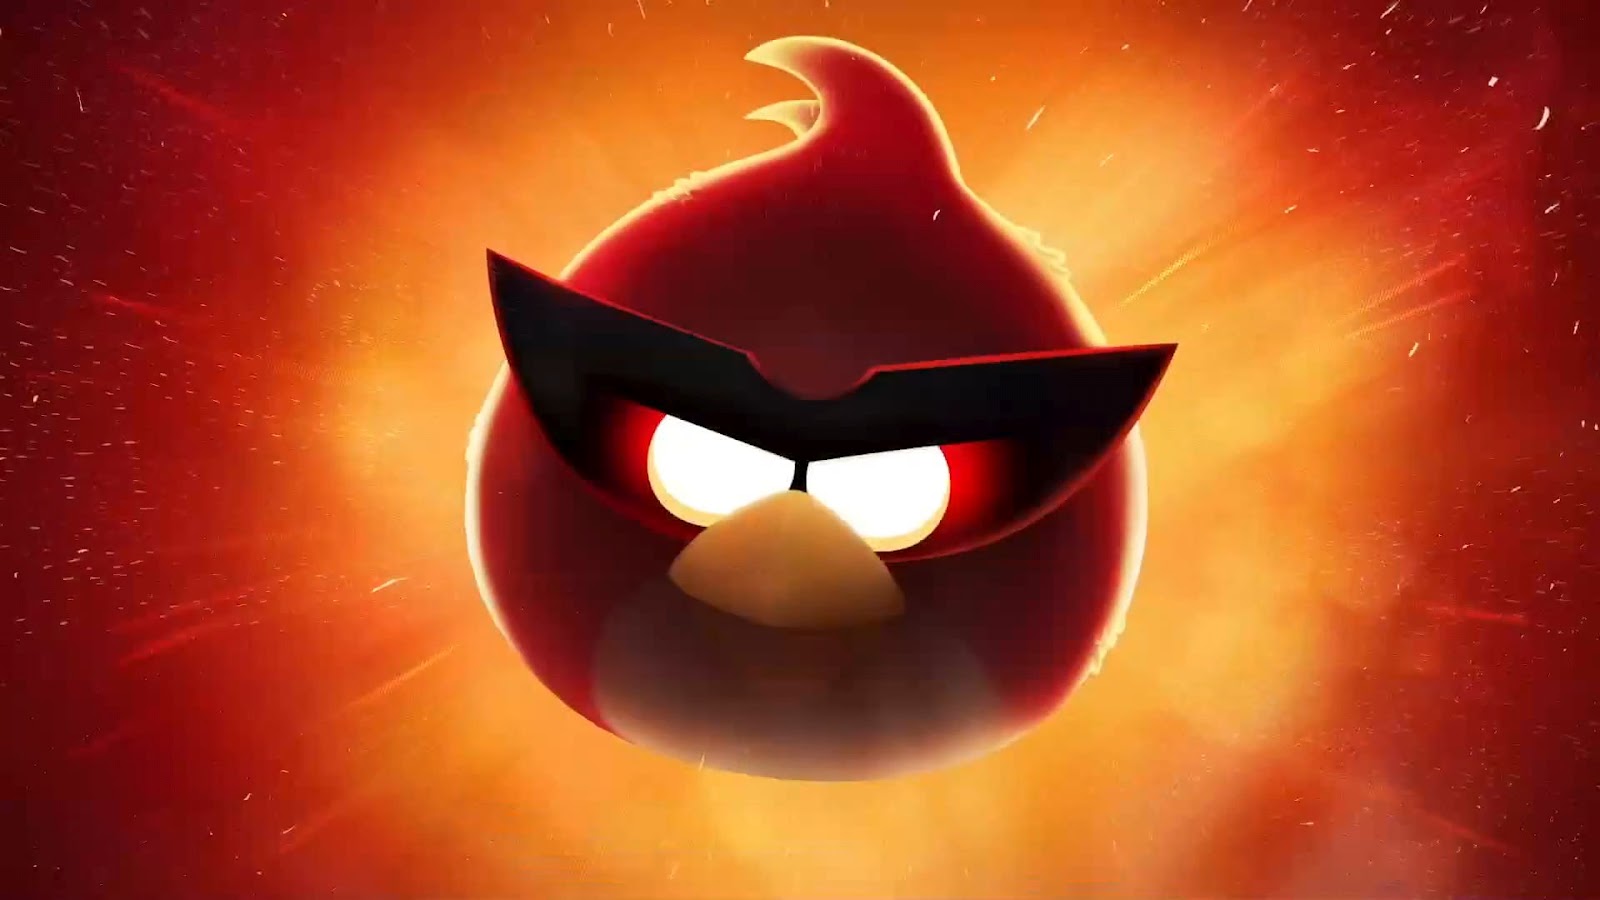 Latest Angry Birds Hd Wallpapers Free Download New HD Wallpapers